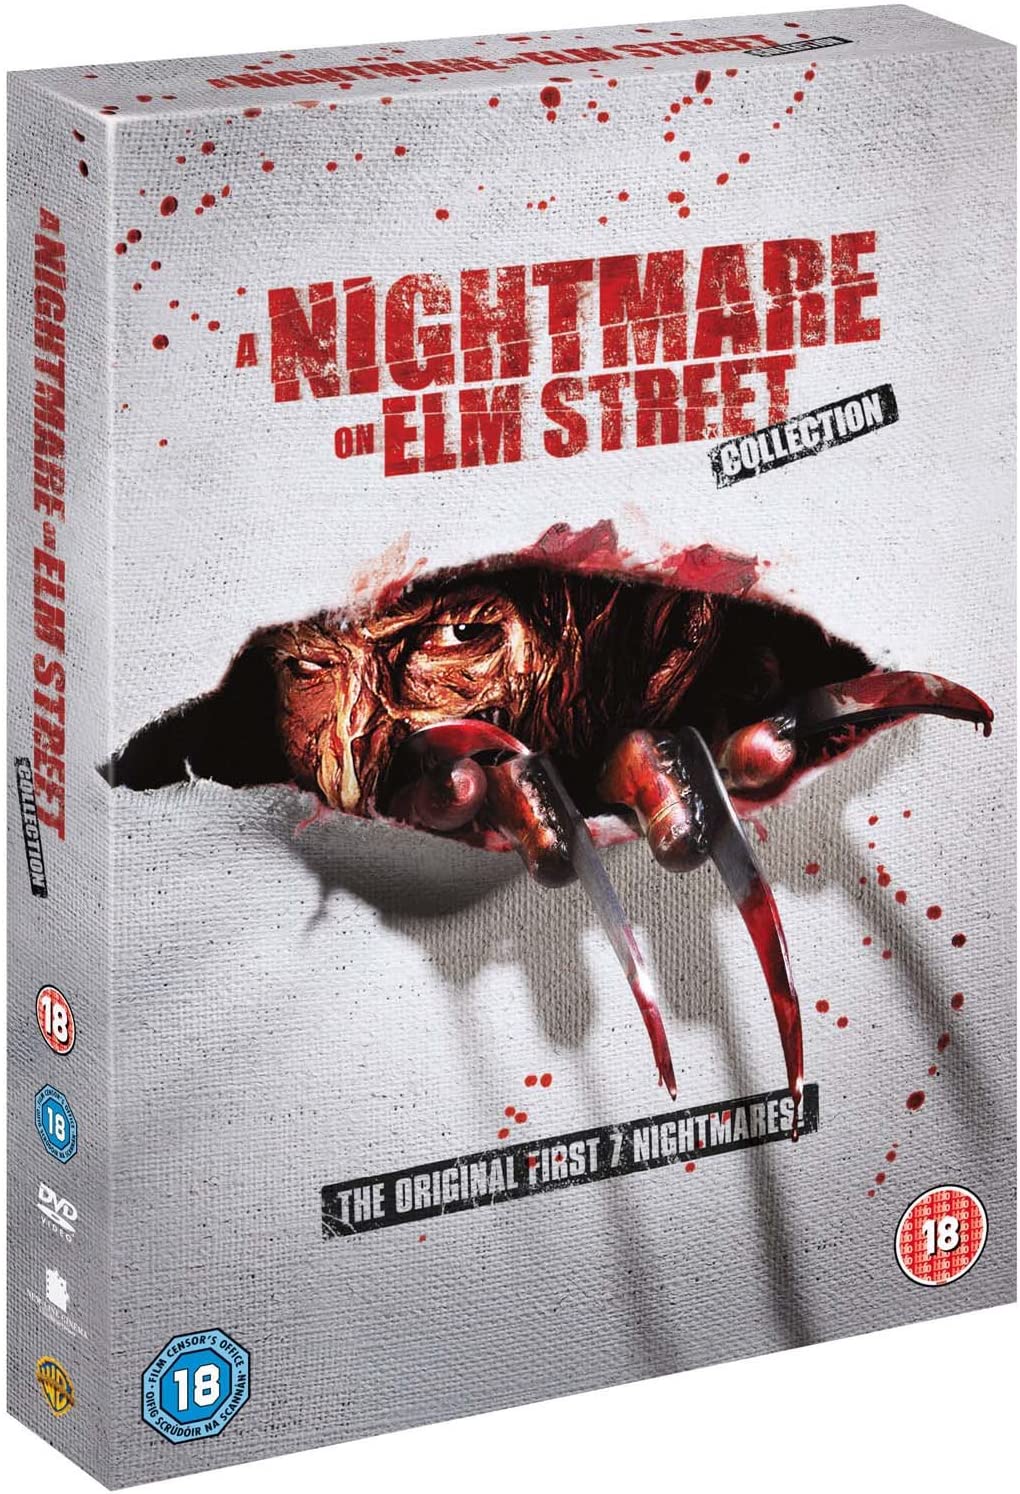 A Nightmare On Elm Street Collection [7 Film] [1984] [2011]